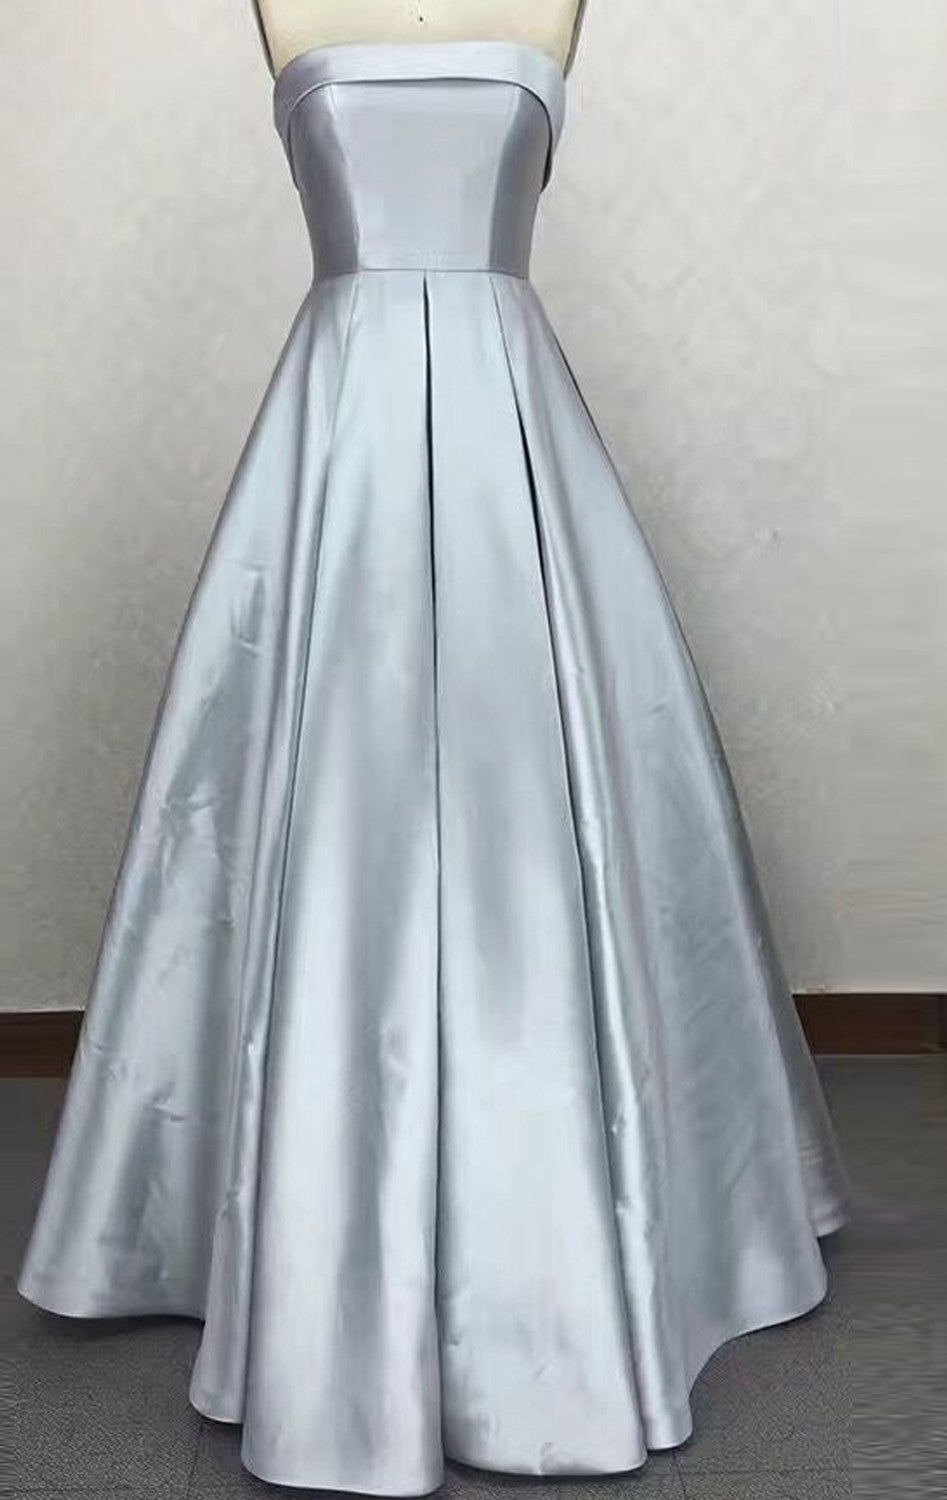 Shine Bright in a Stunning Silver Dress